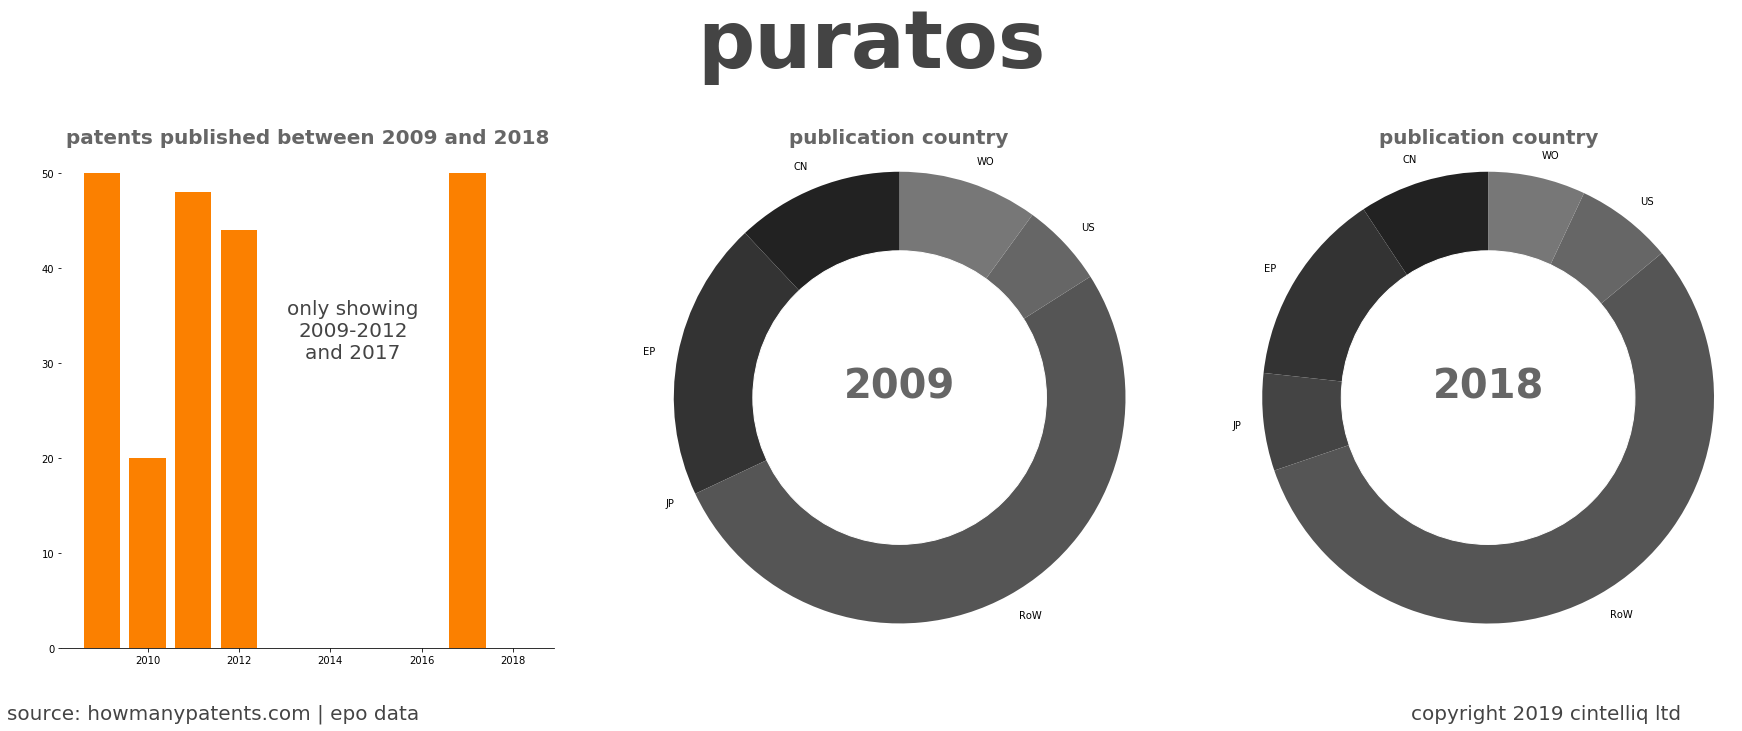 summary of patents for Puratos